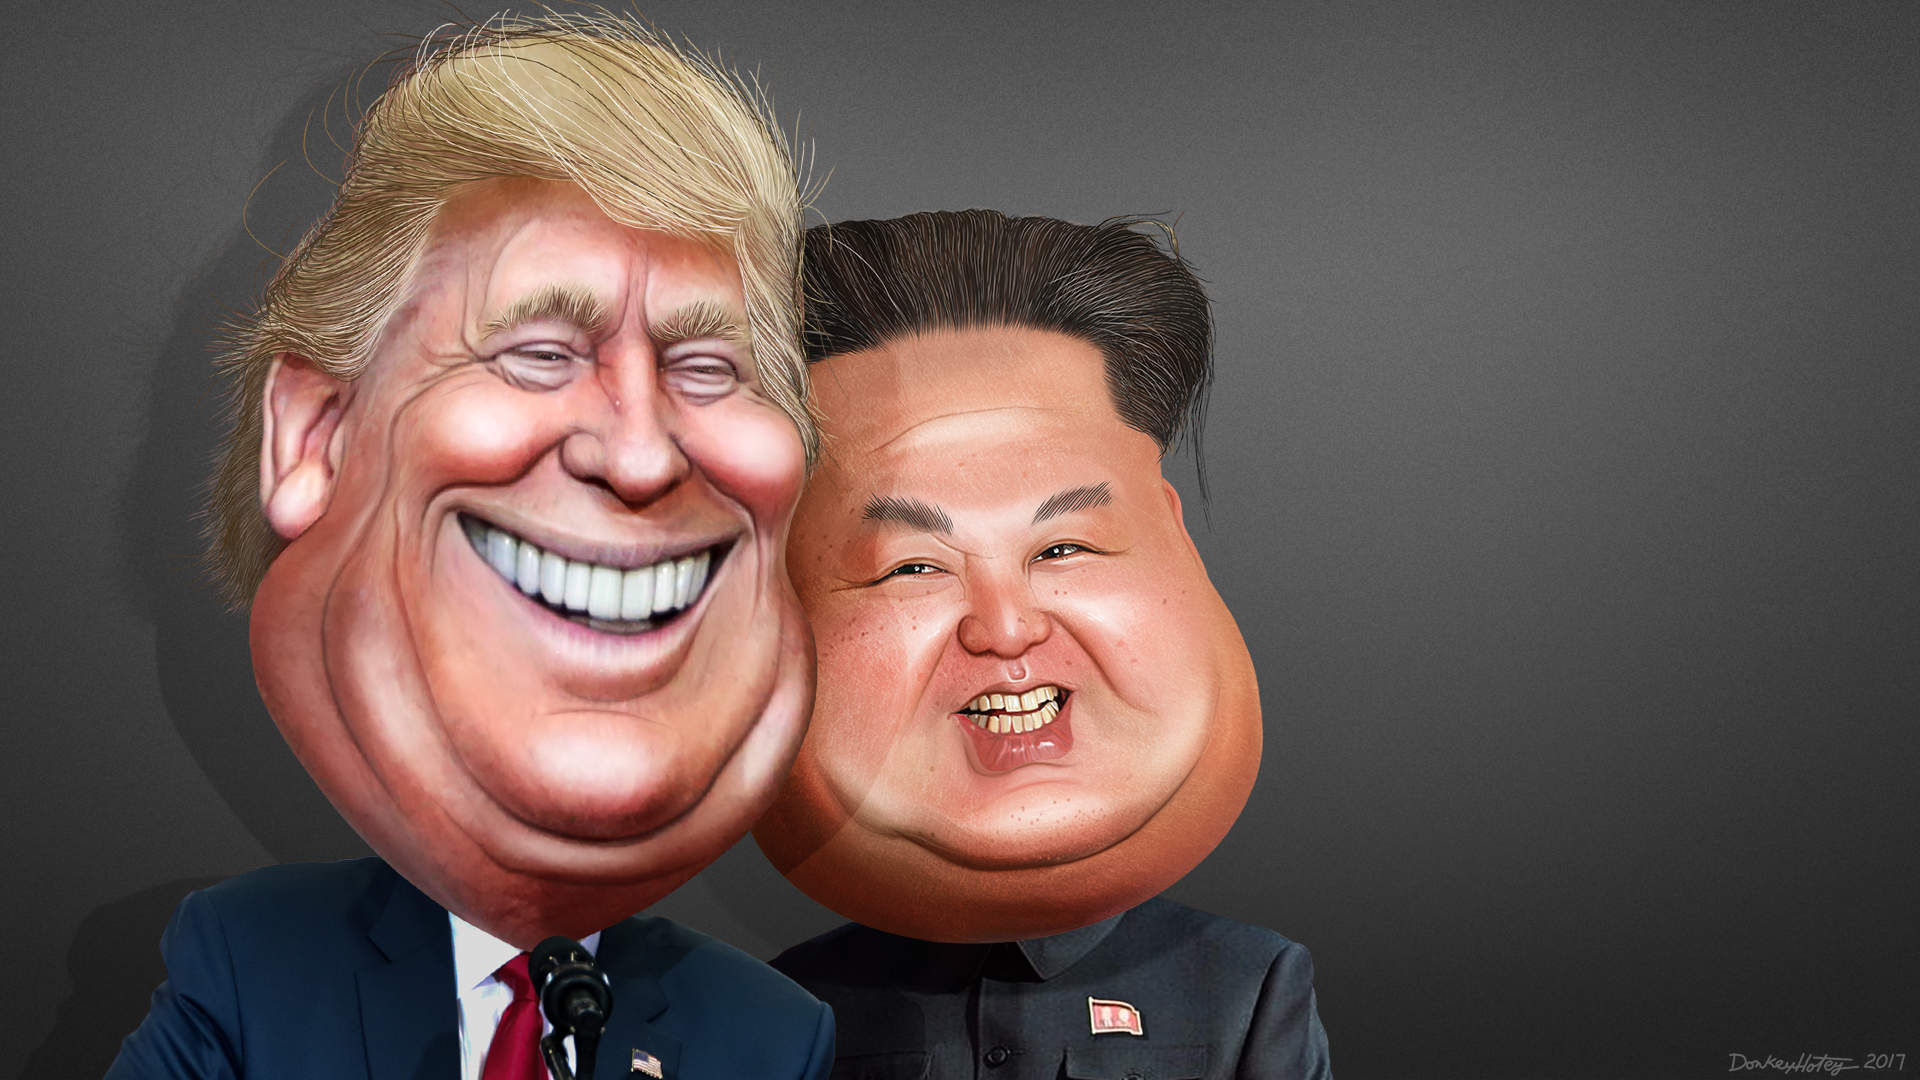 Here’s what the United States and North Korea could trade if nuclear talks go well